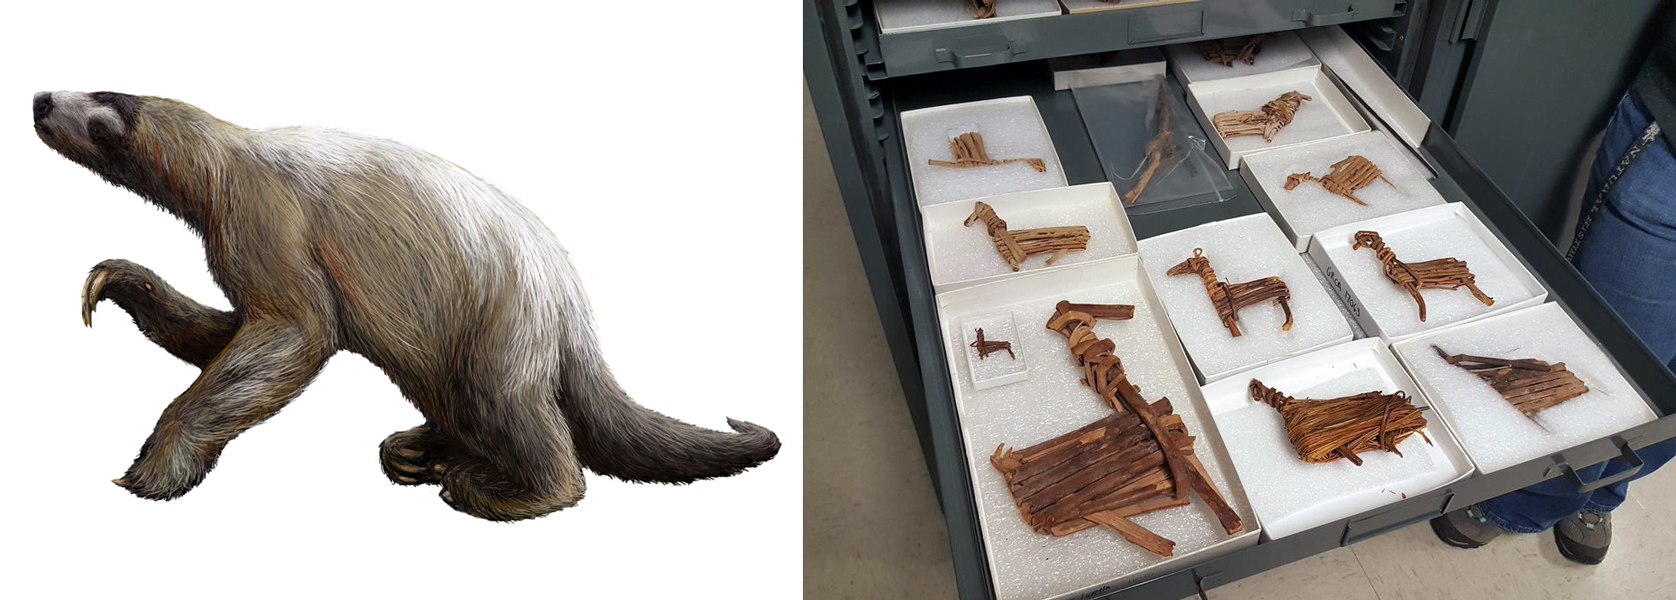 Two images hint at the history of the Grand Canyon. On left, illustration depicts an extinct Shasta ground sloth (Nothrotheriops shastensis), a now bear-sized species that once roamed the American west. On right, a photo shows a collection of ancient split twig figurines stored in a drawer by the National Park Service.